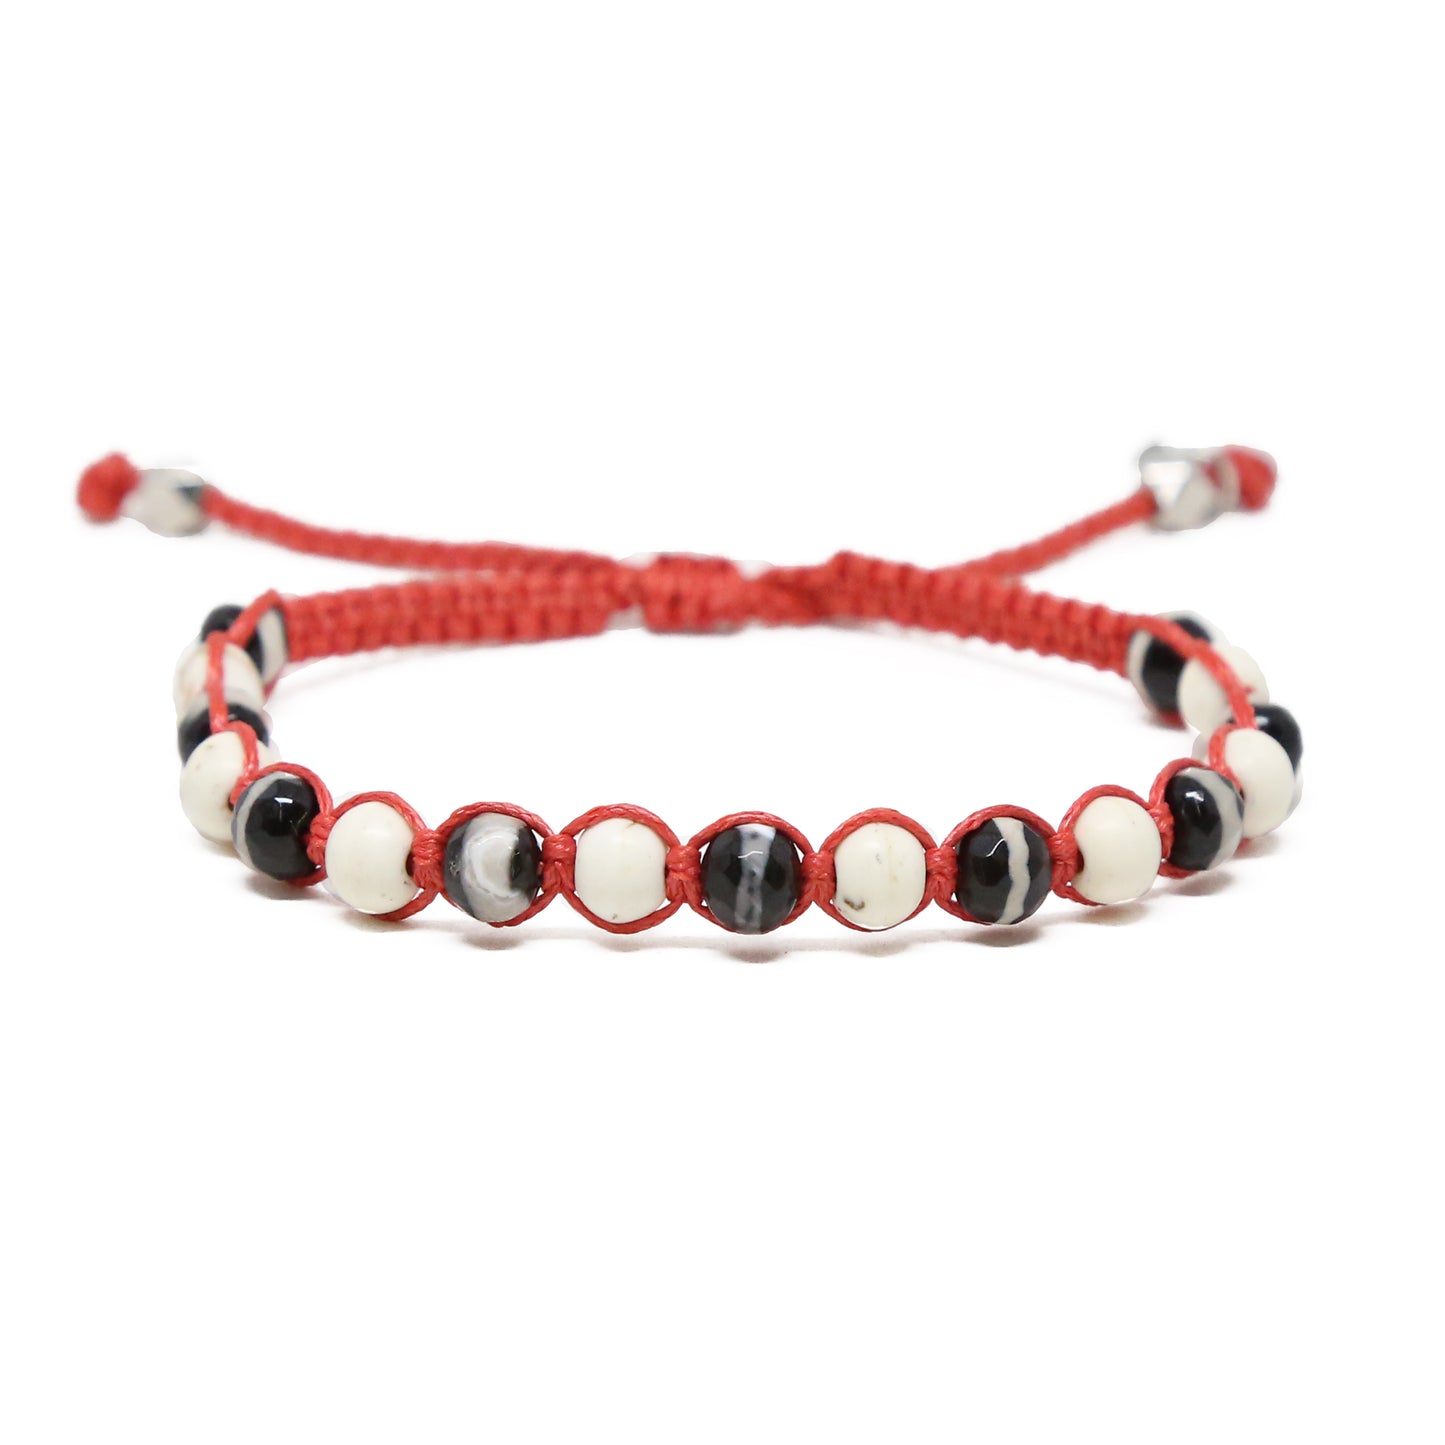 Ready and Steady Bracelet in Red and Silver Ox